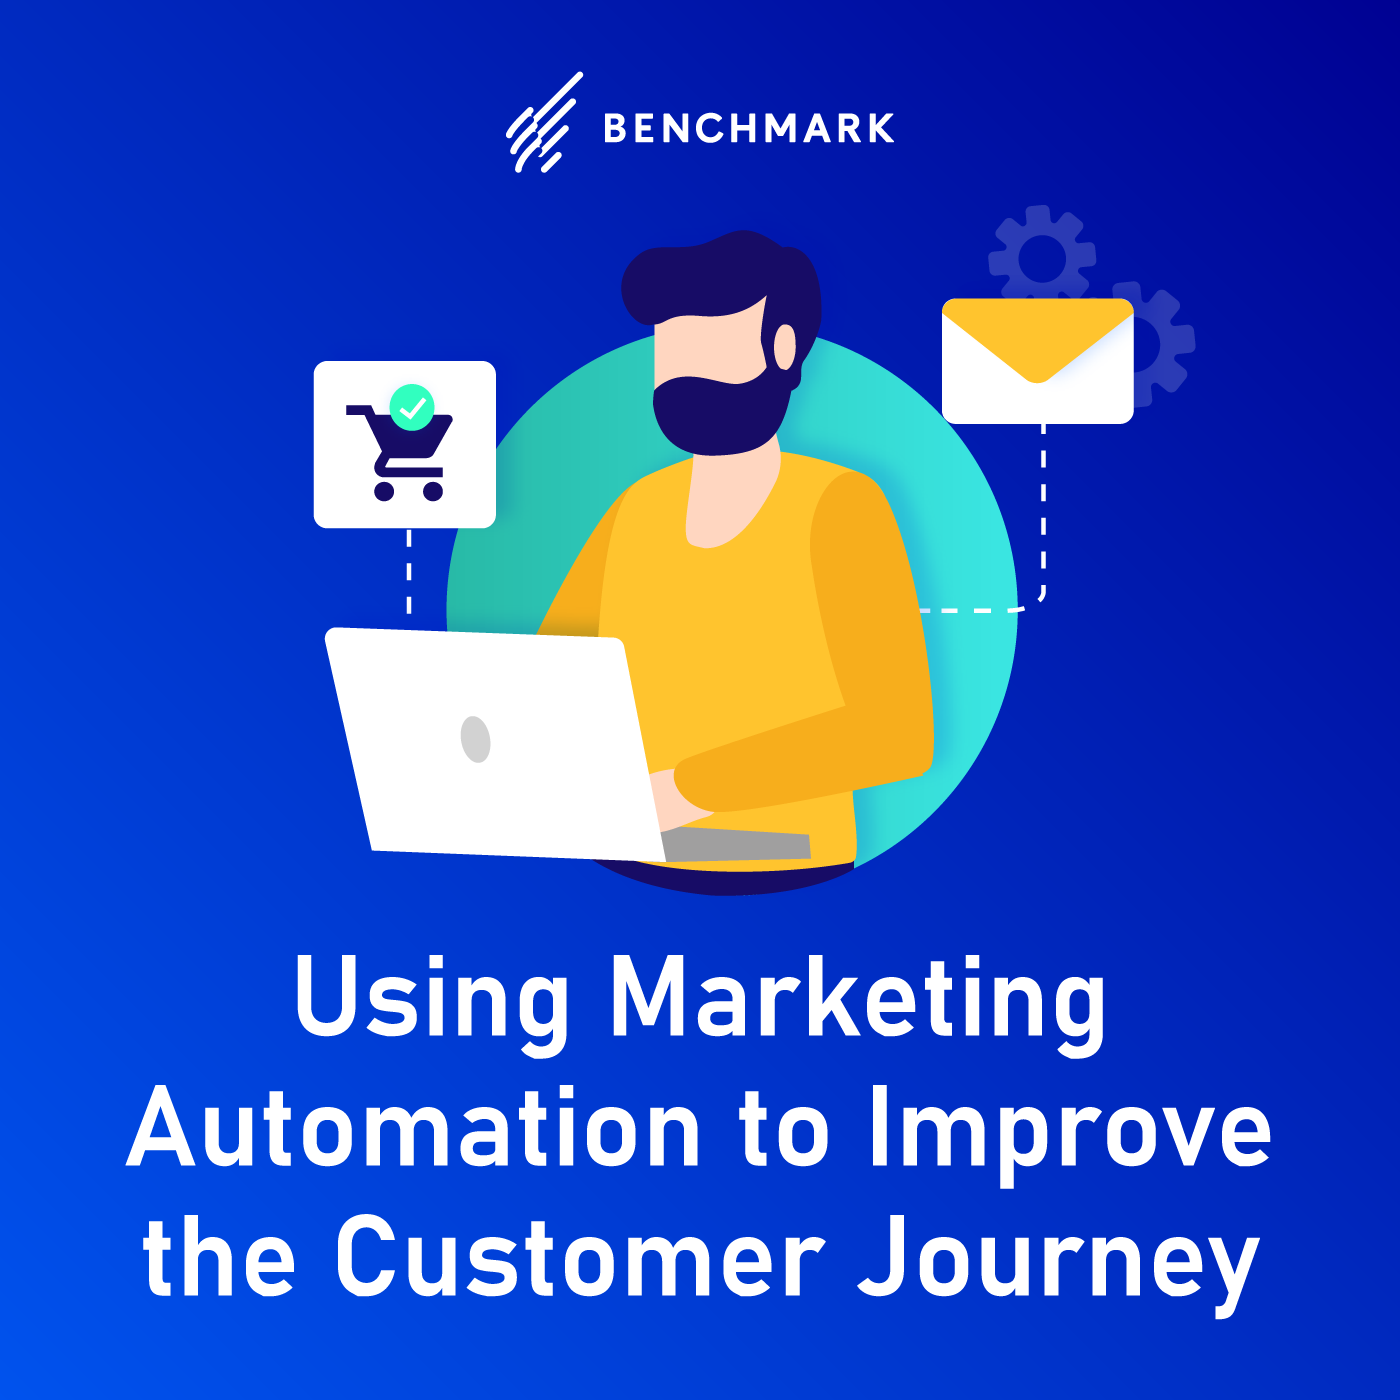 Using Marketing Automation to Improve the Customer Journey